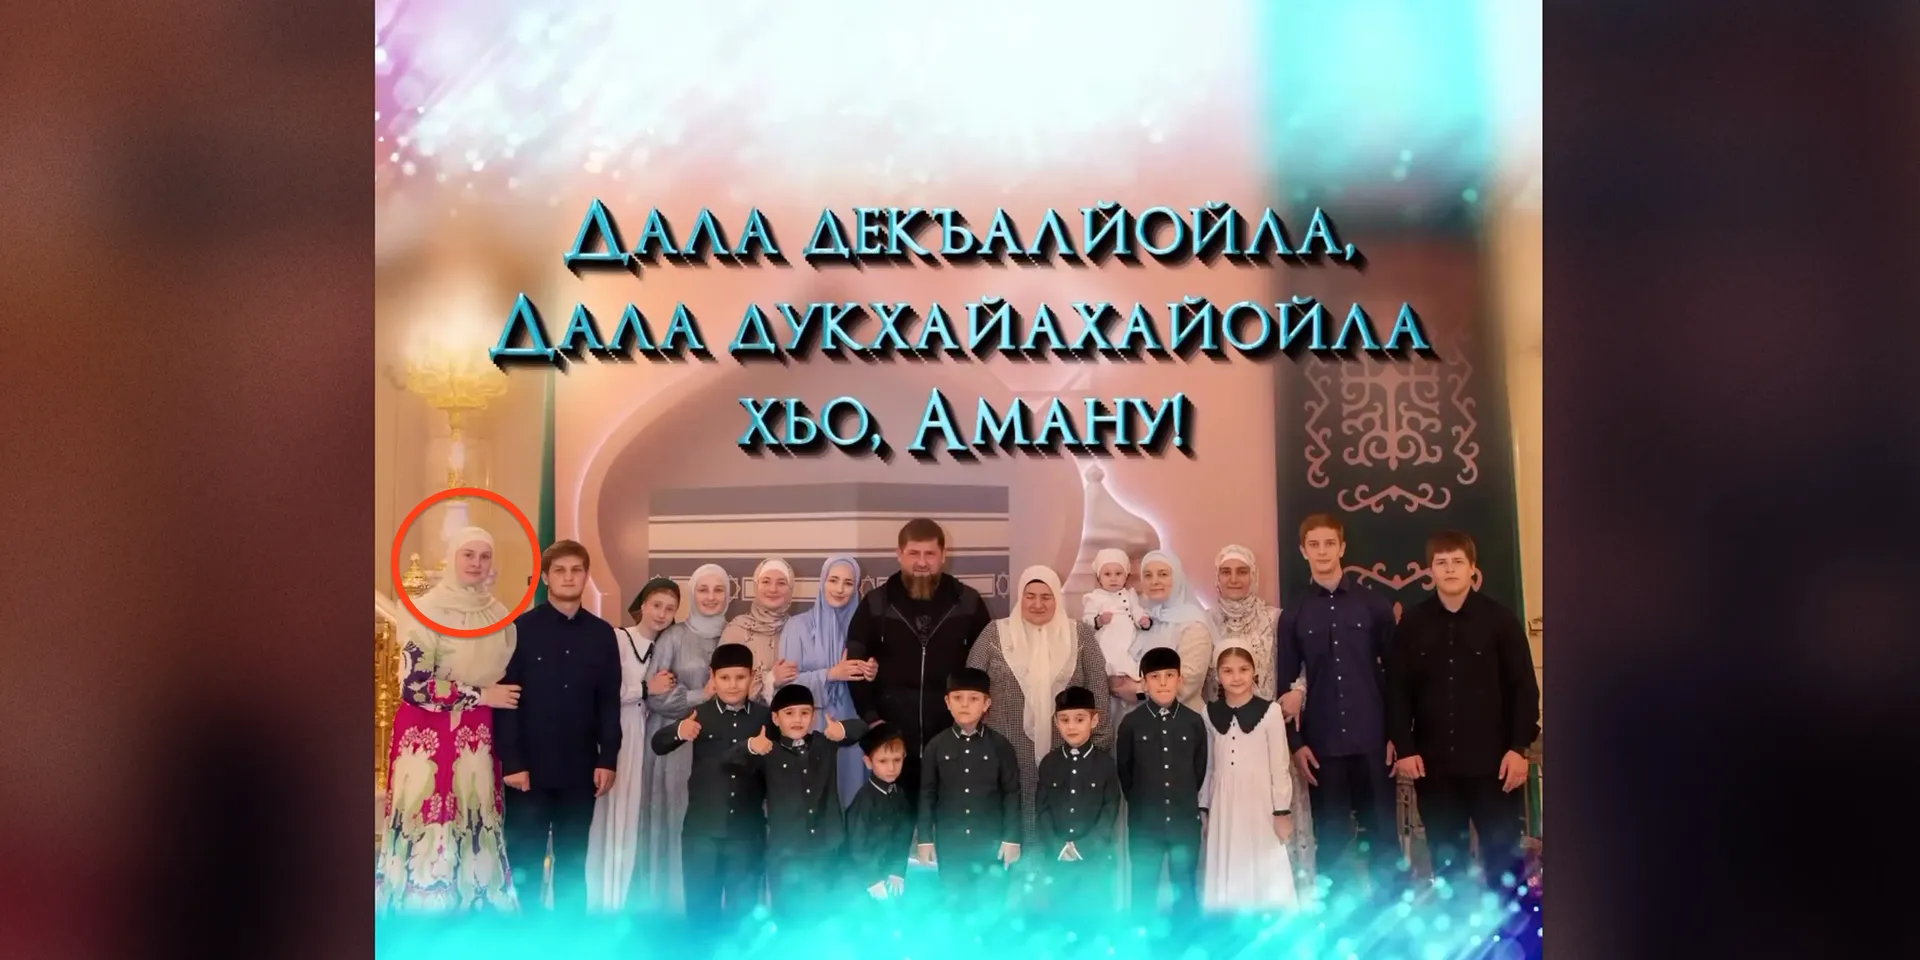 Ramzan Kadyrov Published a Family Photo with His Secret Wife